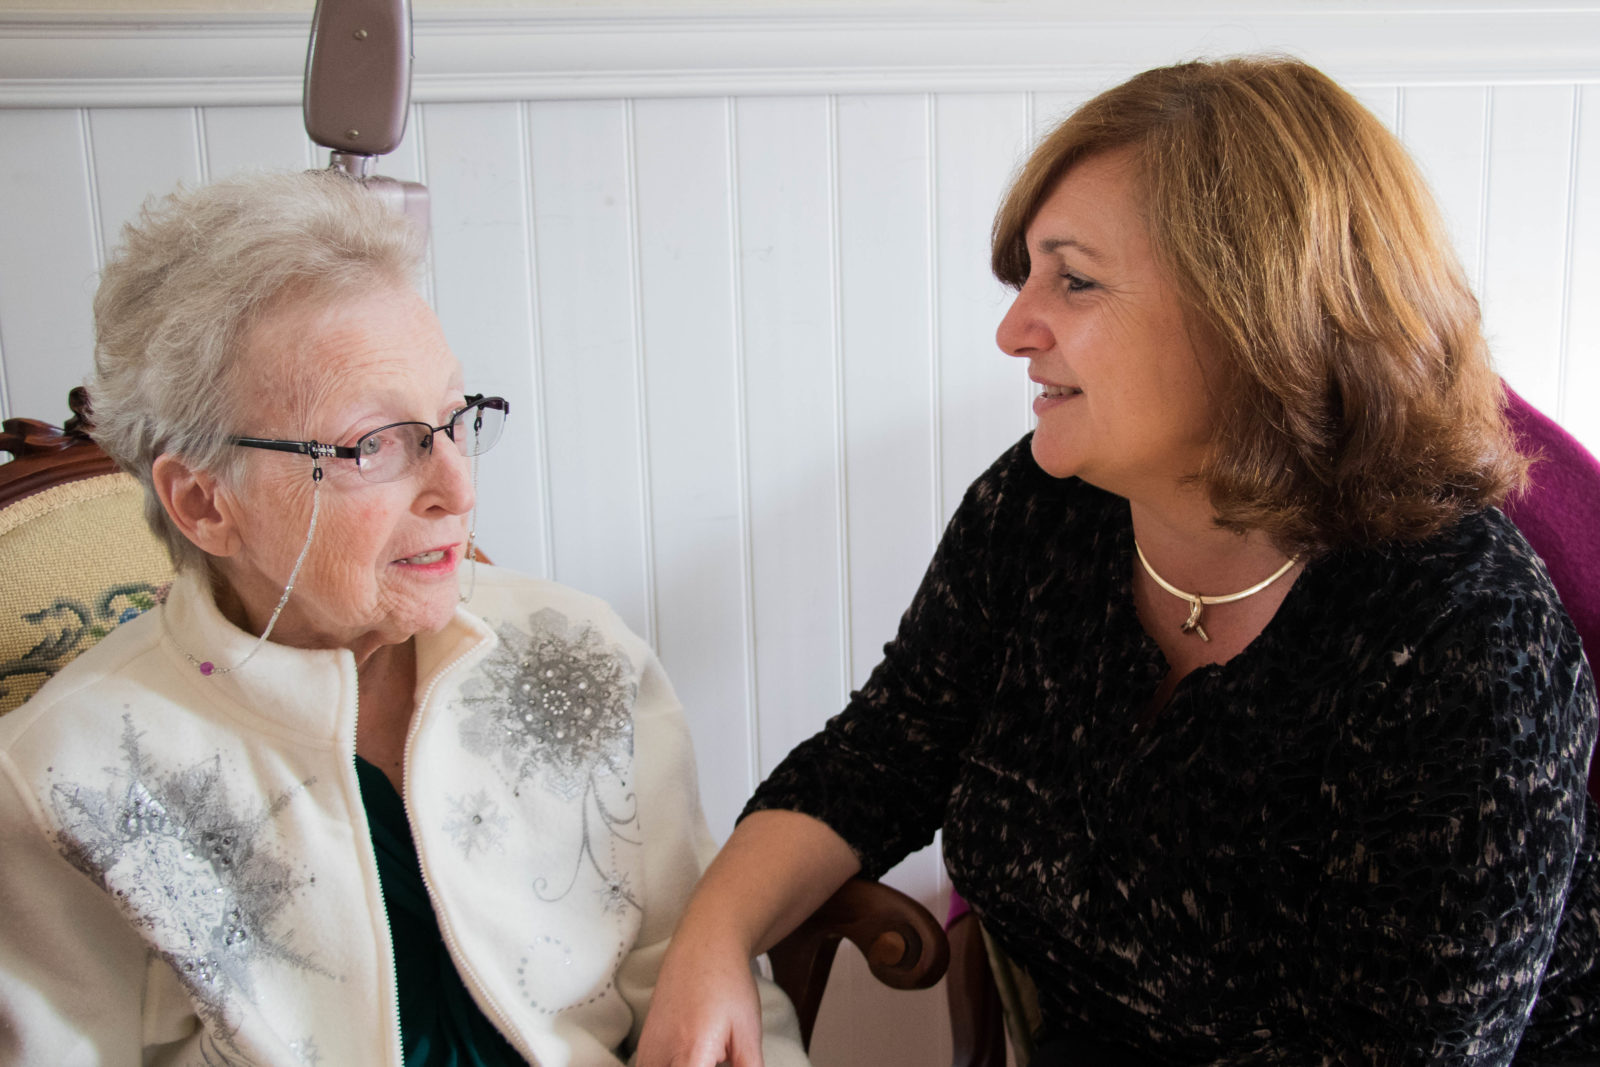 caregiver and elderly woman chatting